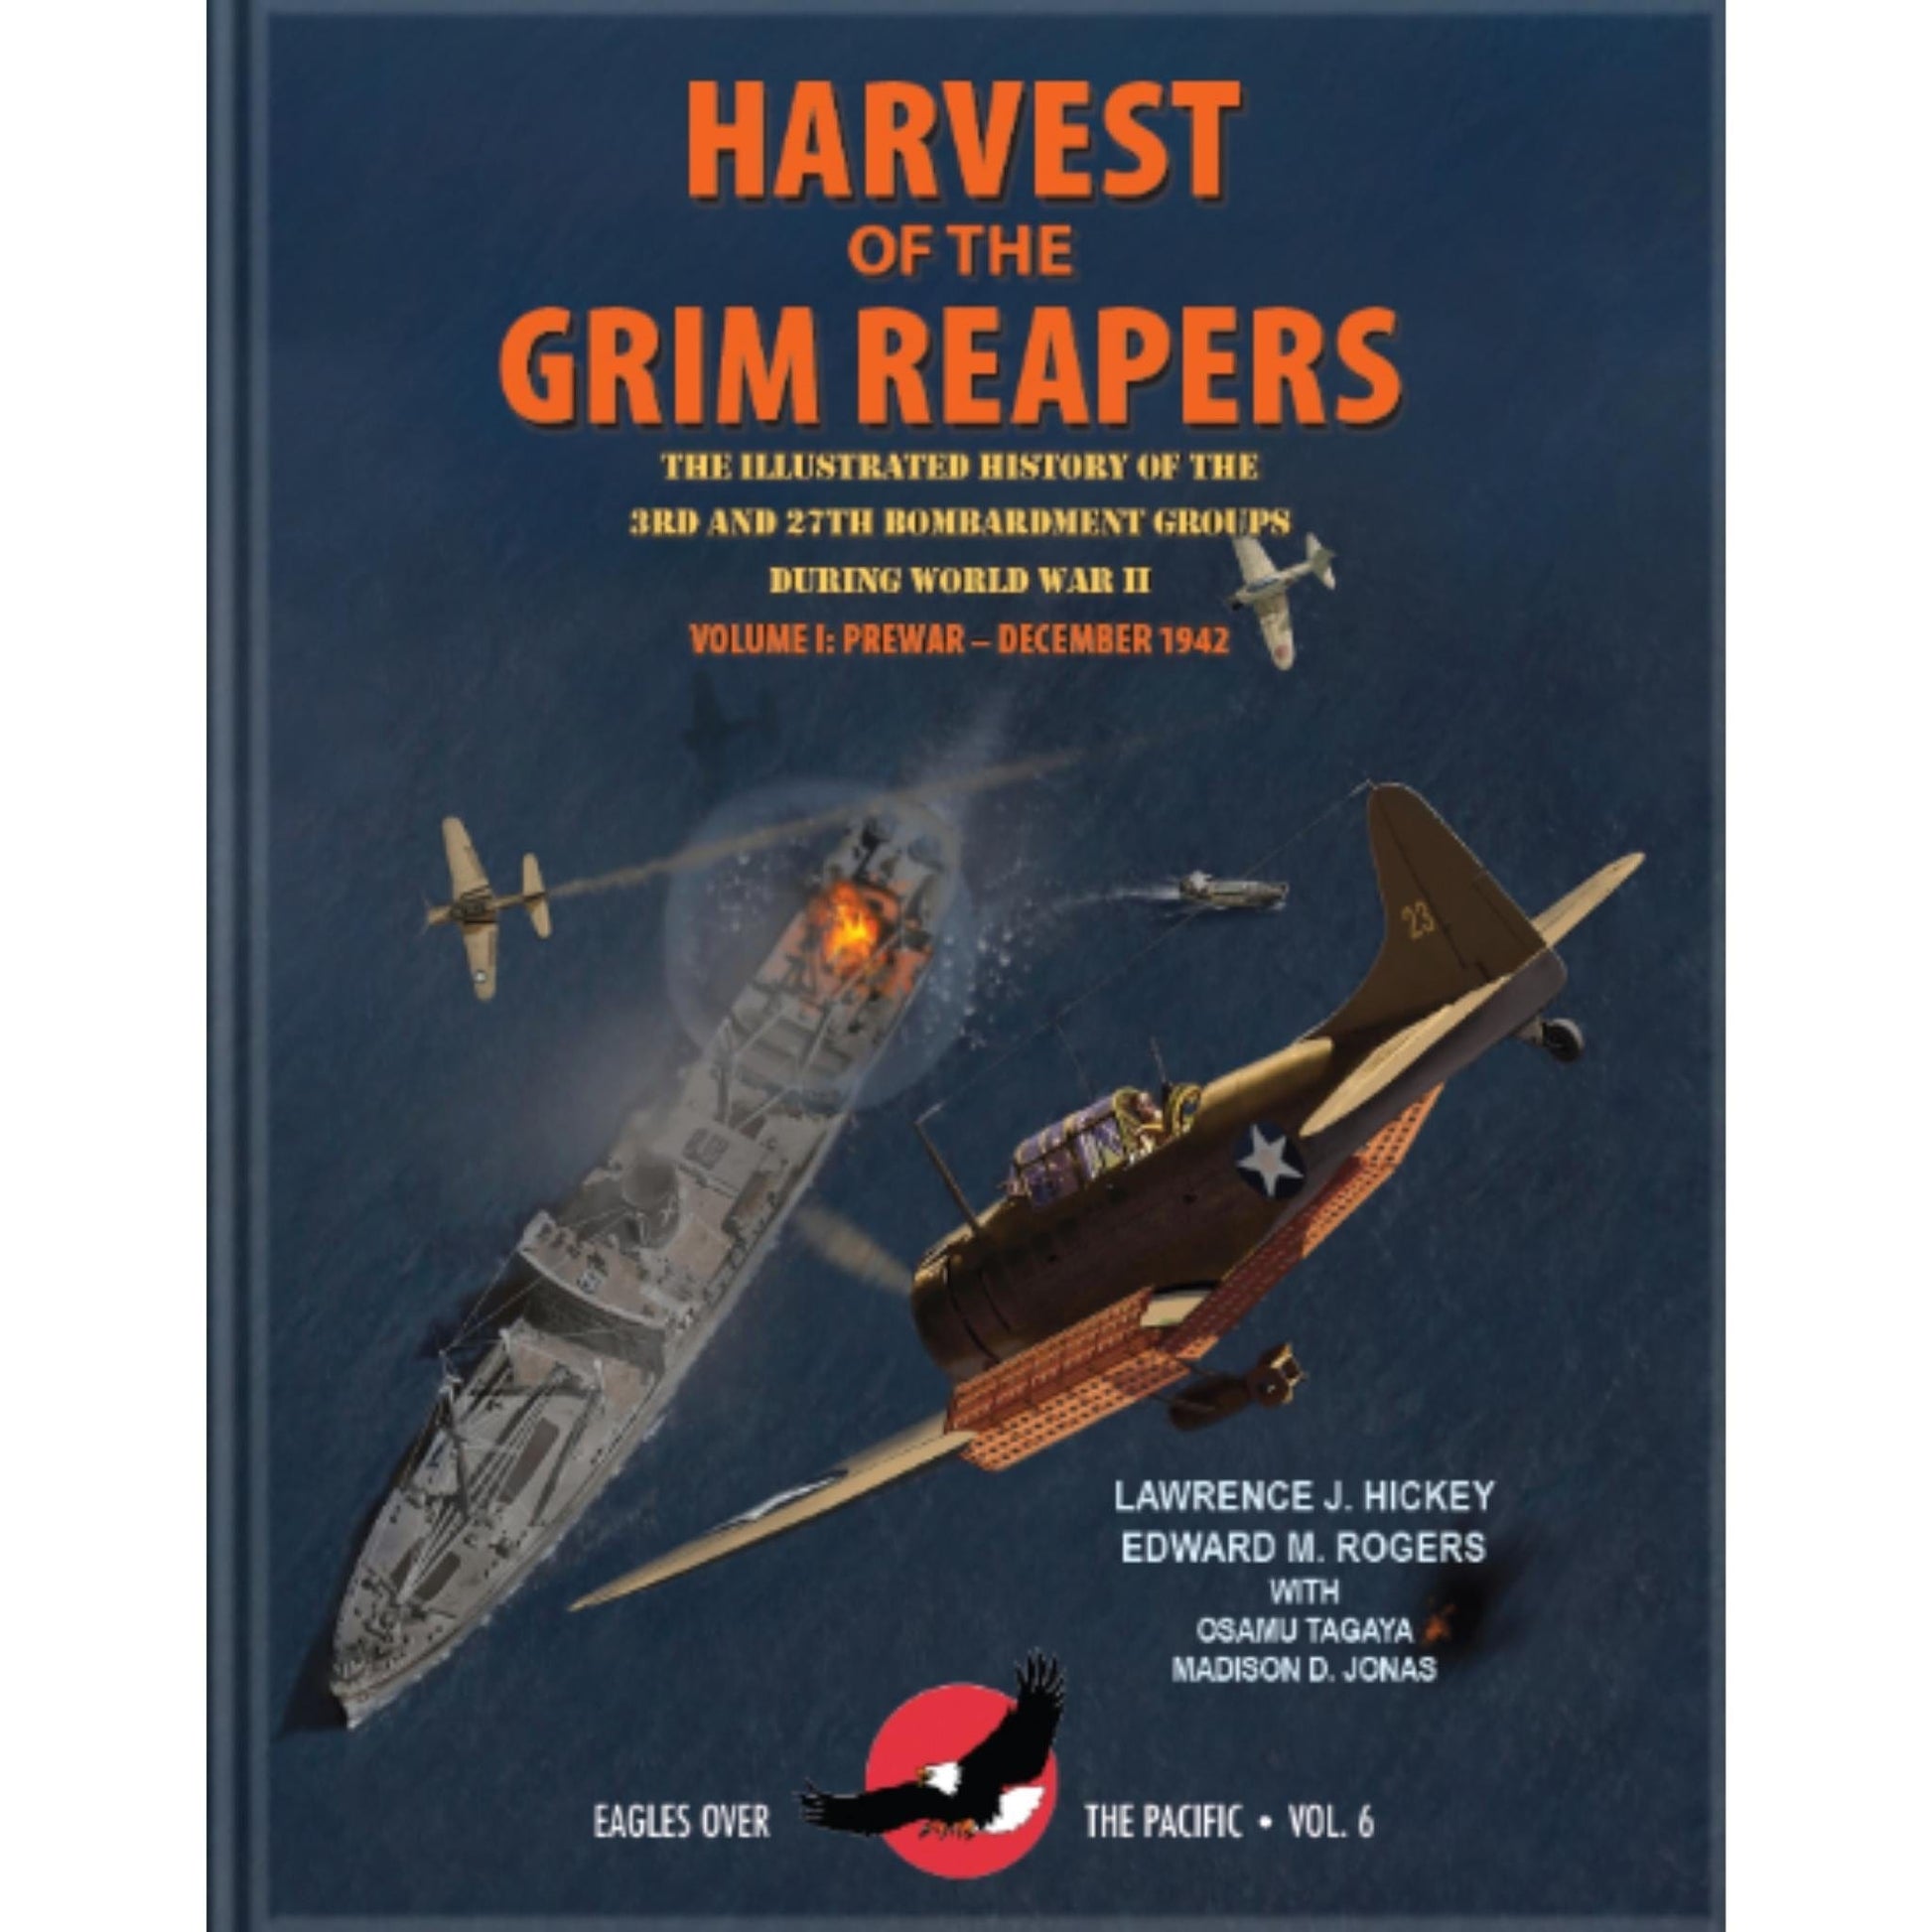 Book Cover of "Harvest of the Grim Reapers Vol. 1" - by author Lawrence J. Hickey from the history list store